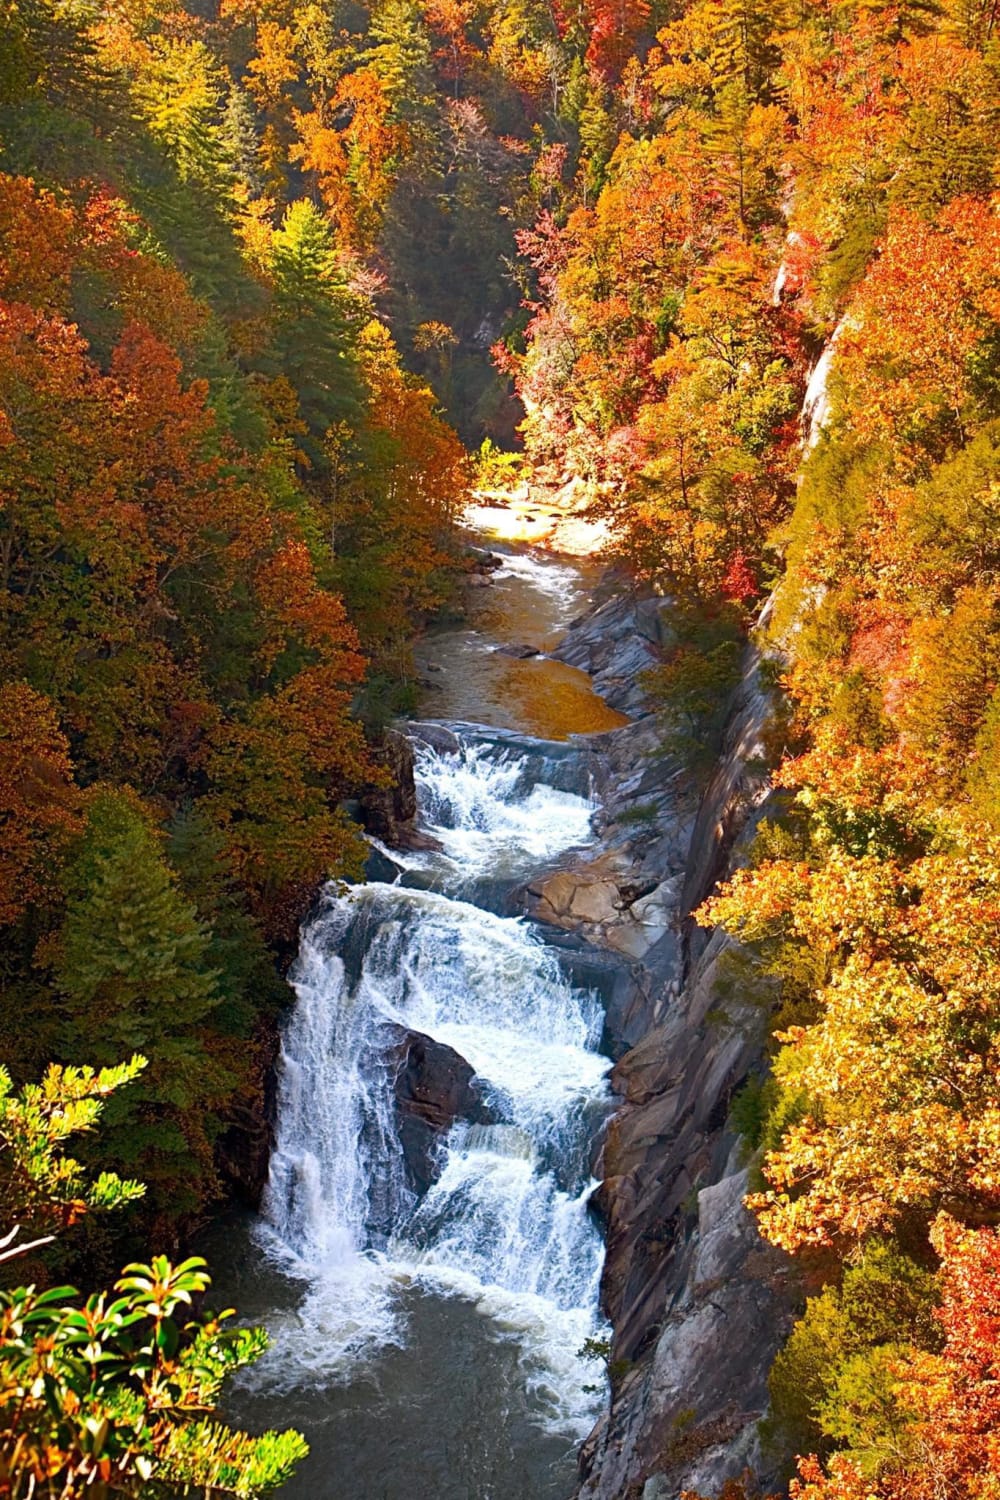 The Tallulah river carves its way through Tallulah Gorge State Park in North Georgia.